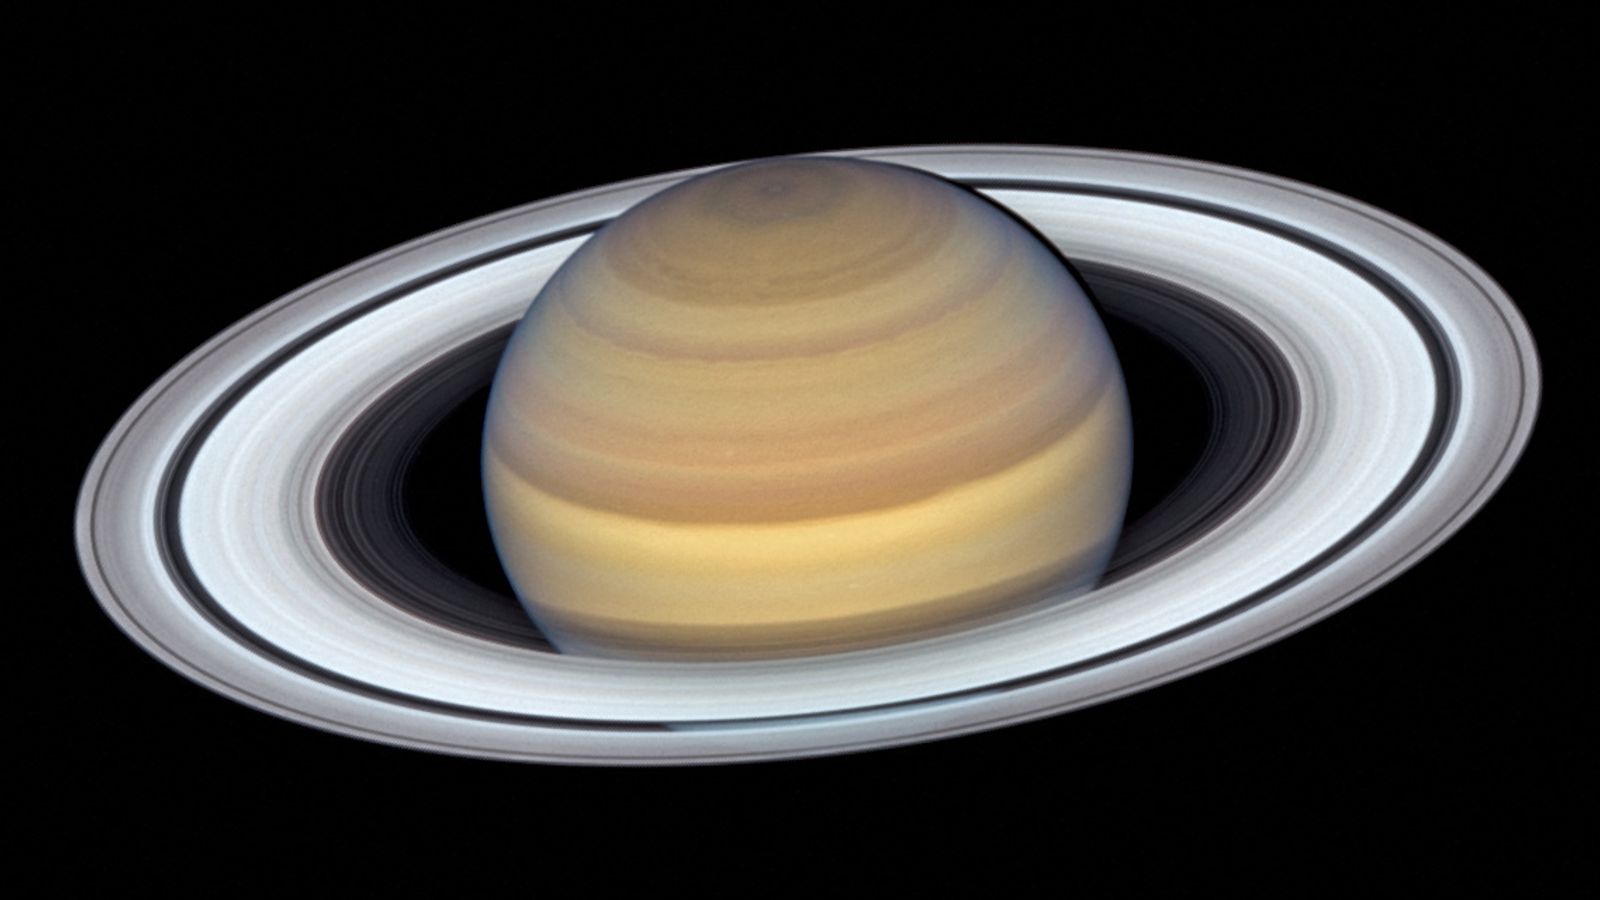 Saturn's rings, which are an iconic feature of the giant planet for stargazers, as photographed by NASA's Cassini spacecraft